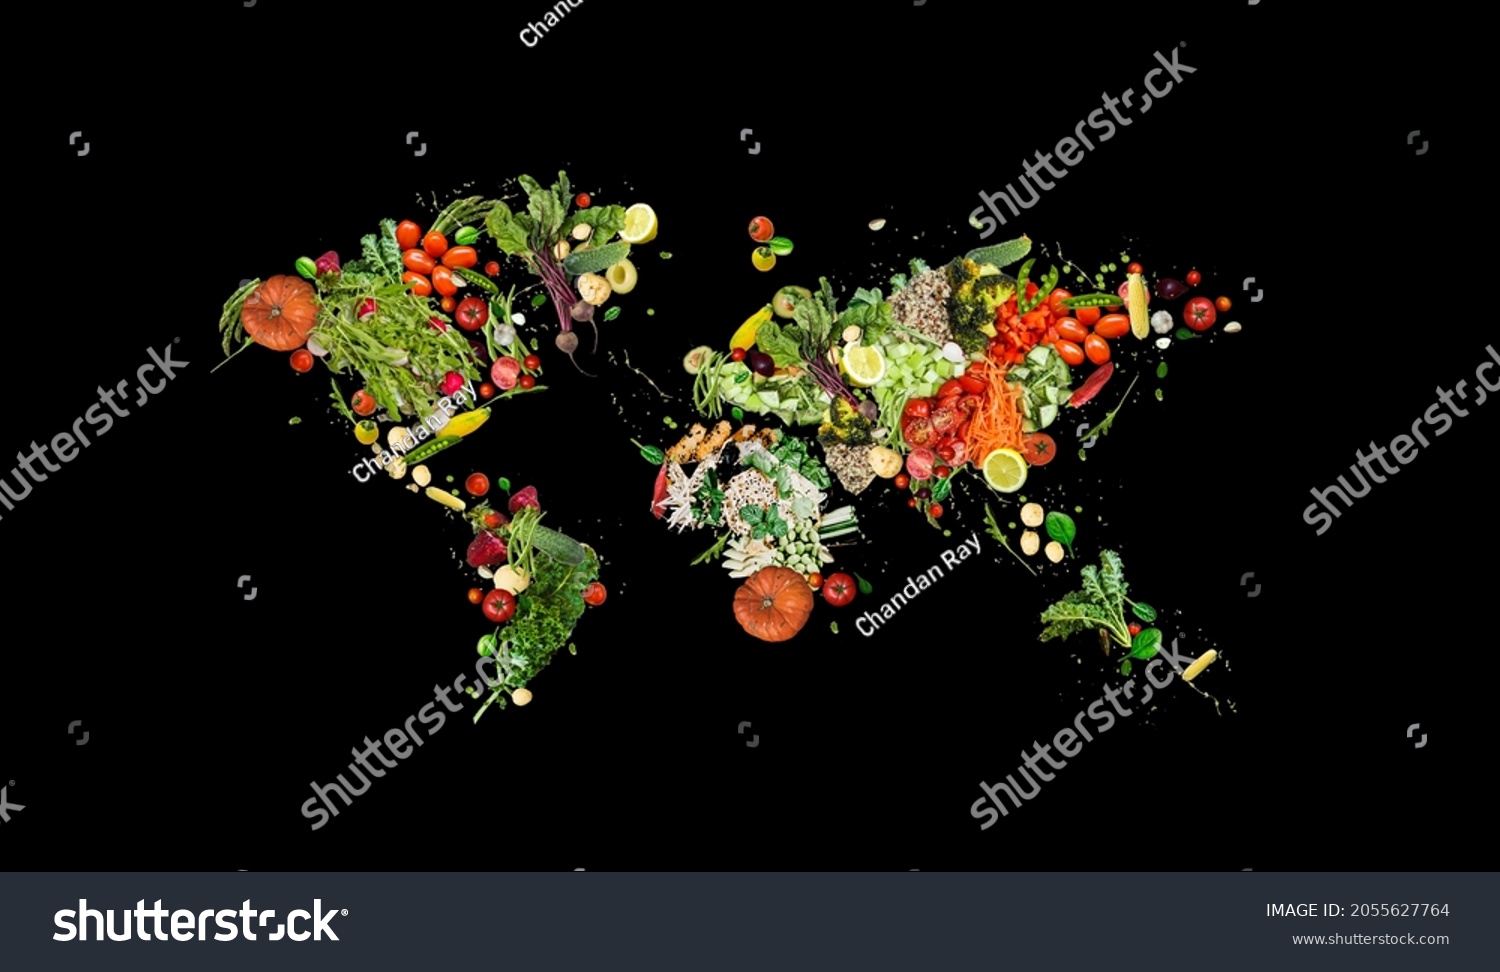 colourful world food day poster with world map #2055627764